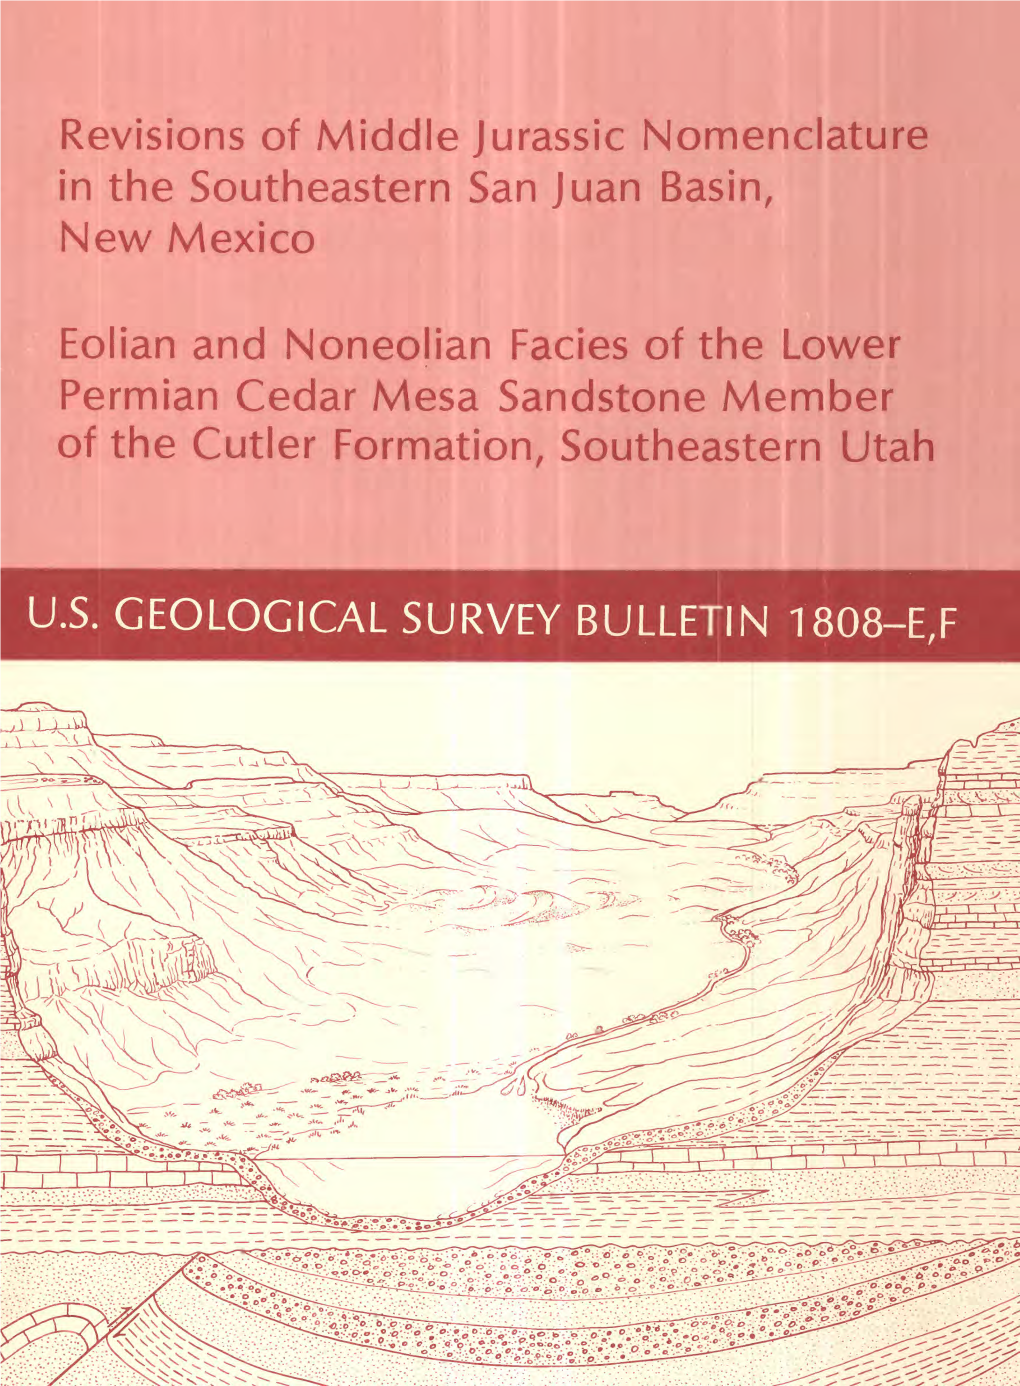 Revisions of Middle Jurassic Nomenclature in the Southeastern San Juan Basin, New Mexico